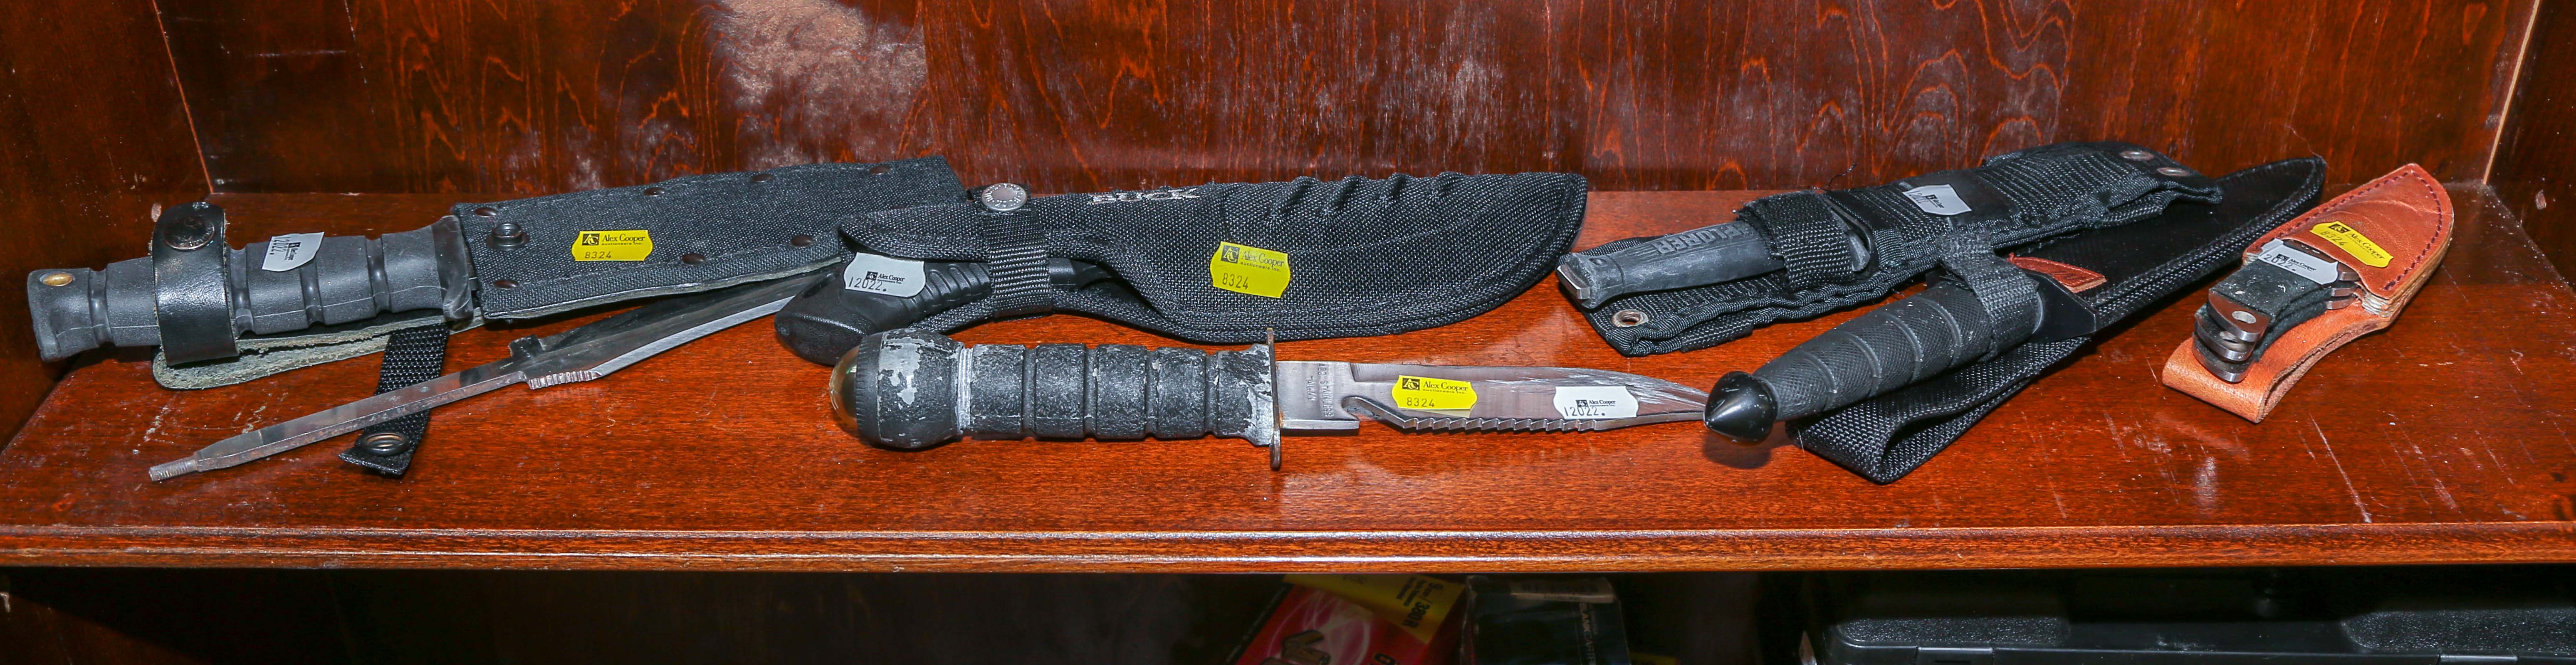 ASSORTMENT OF FIXED BLADE KNIVES Including